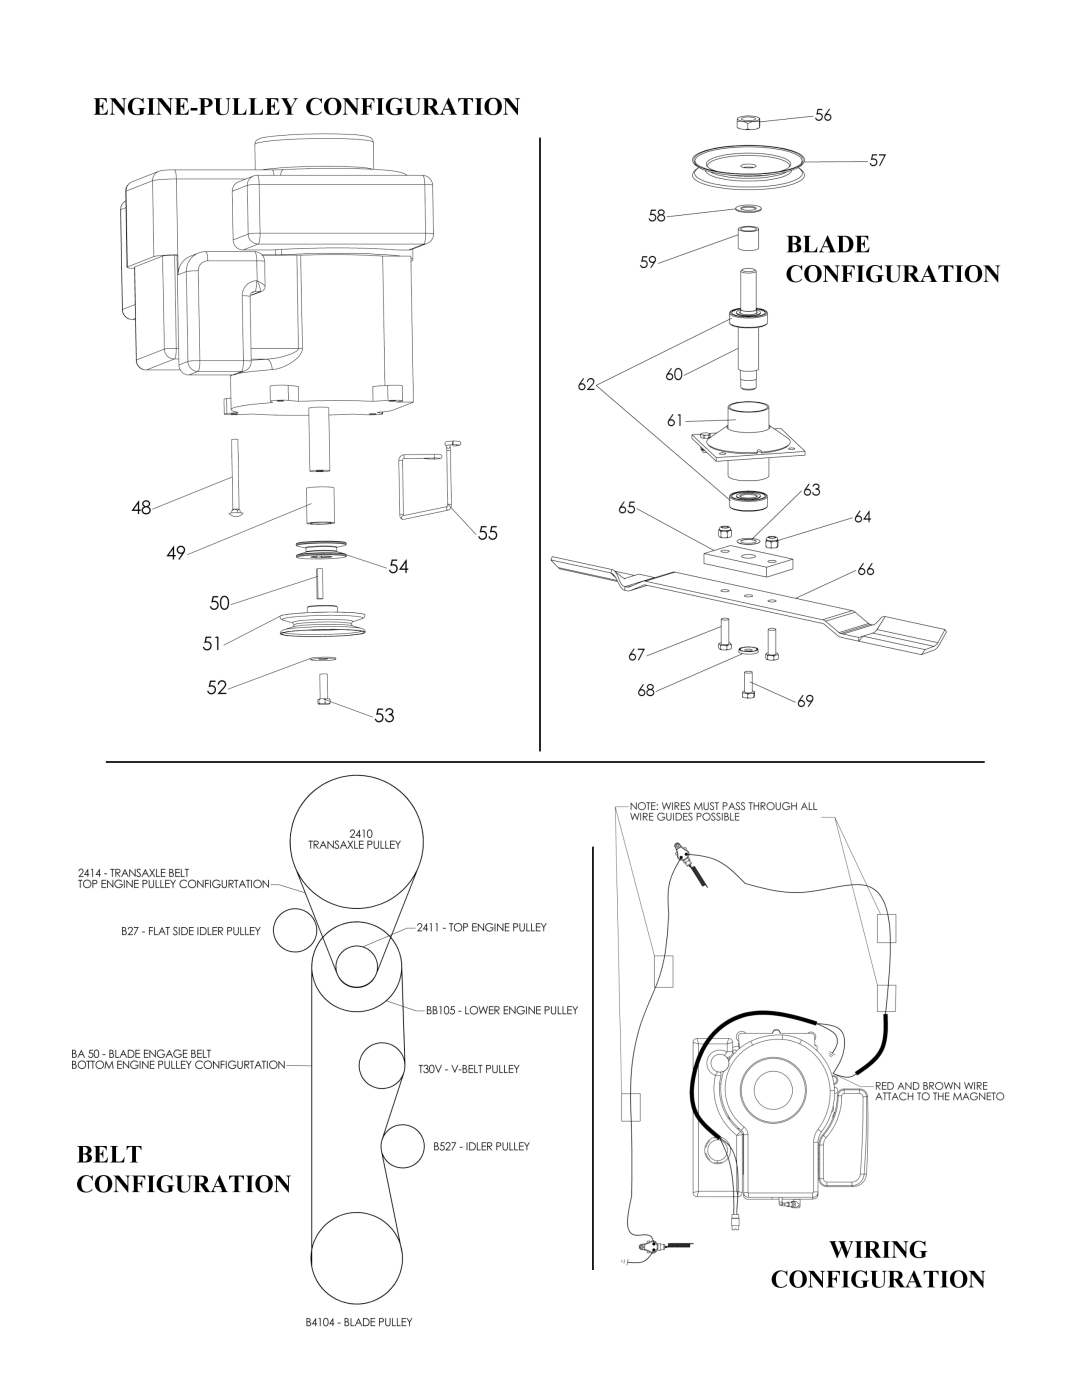 Swisher WB924 owner manual Engine-Pulleyconfiguration Blade Configuration, Belt Configuration Wiring Configuration 